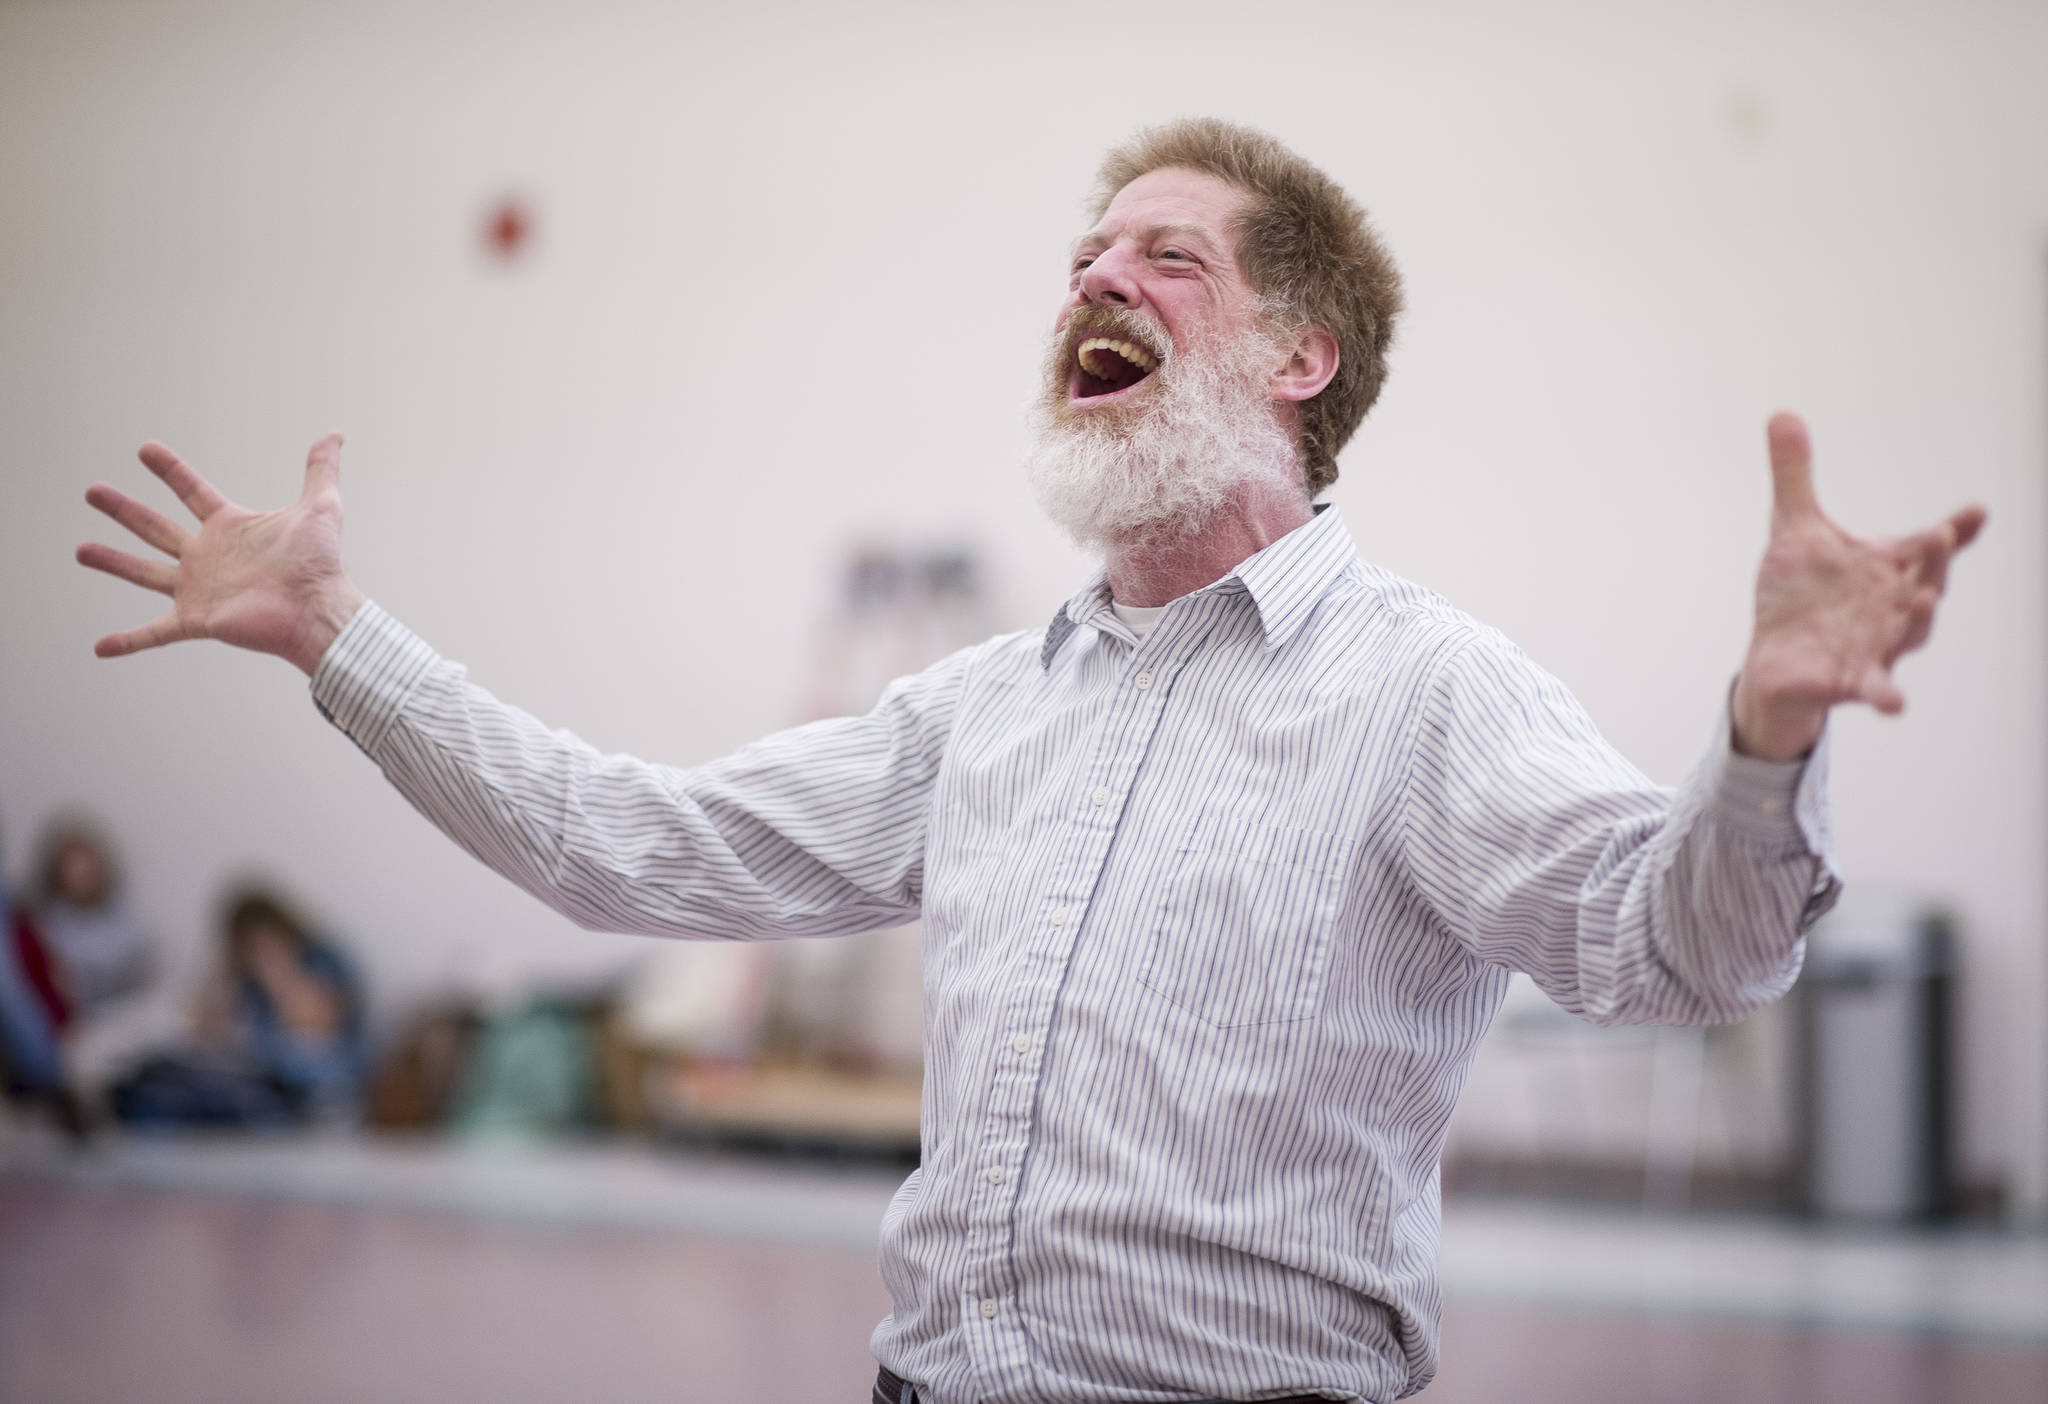 Michael Wittig Sr. as Tevye at the rehearsal of Latitude 58’s production of “Fiddler on the Roof” at St. Ann’s Hall on Thursday, Nov. 9, 2017. (Michael Penn | Capital City Weekly)